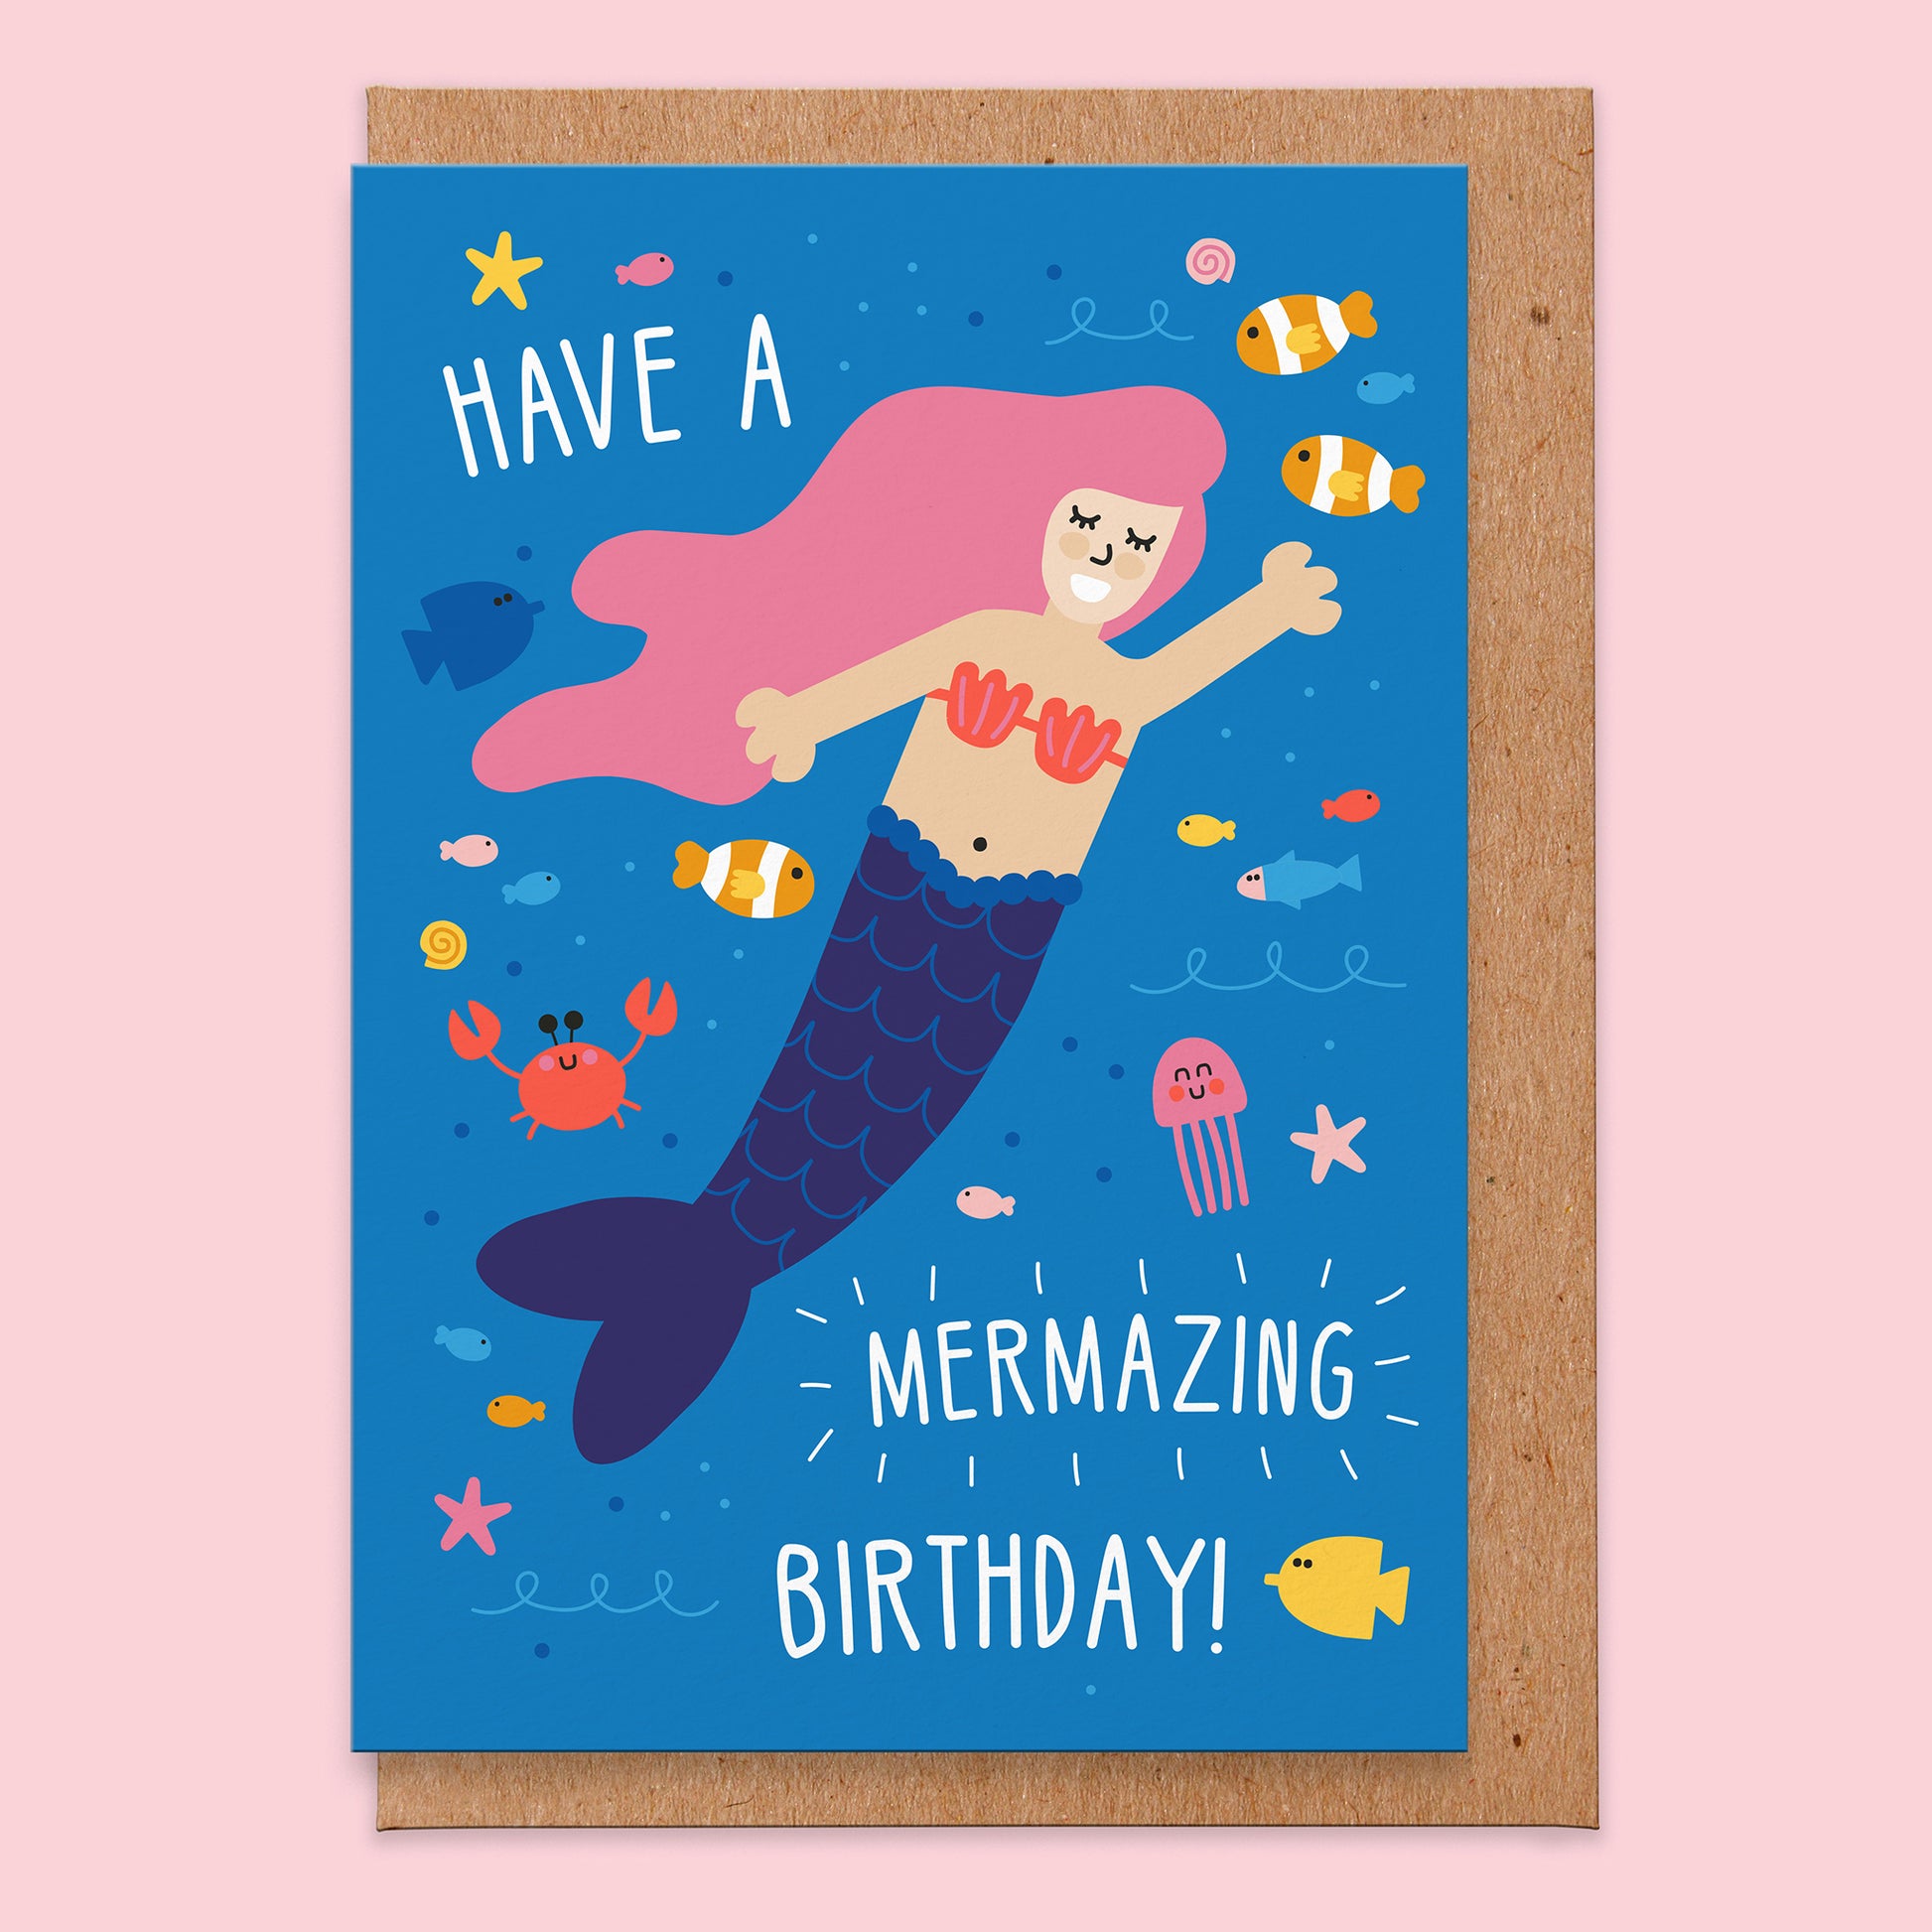 Birthday card with an underwater illustration of a mermaid and various sea creatures and reads have a mermazing birthday.